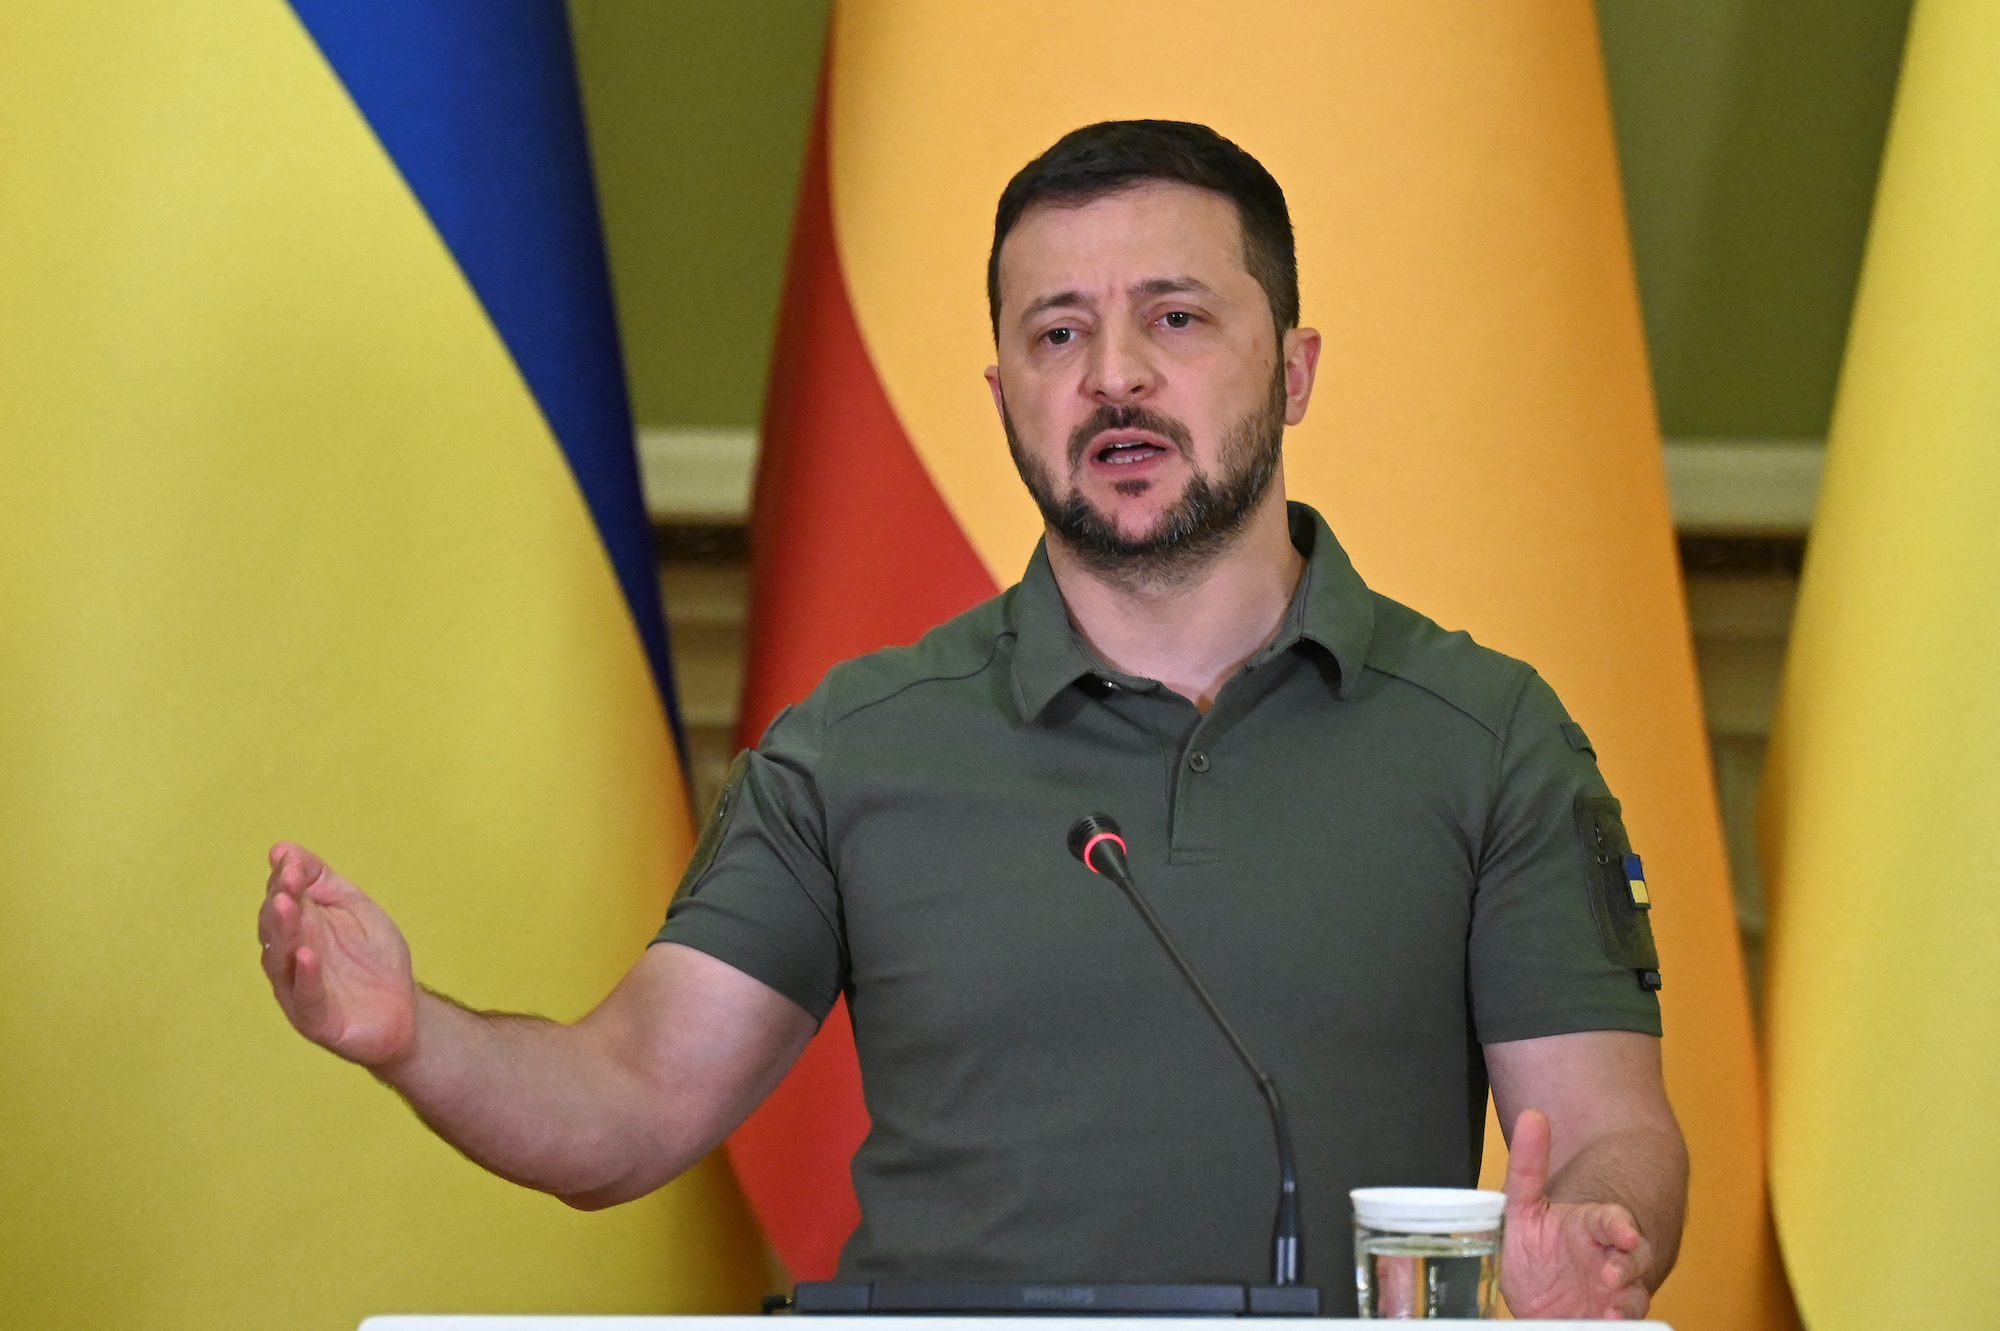 Zelensky attends a press conference in Kyiv on Saturday.